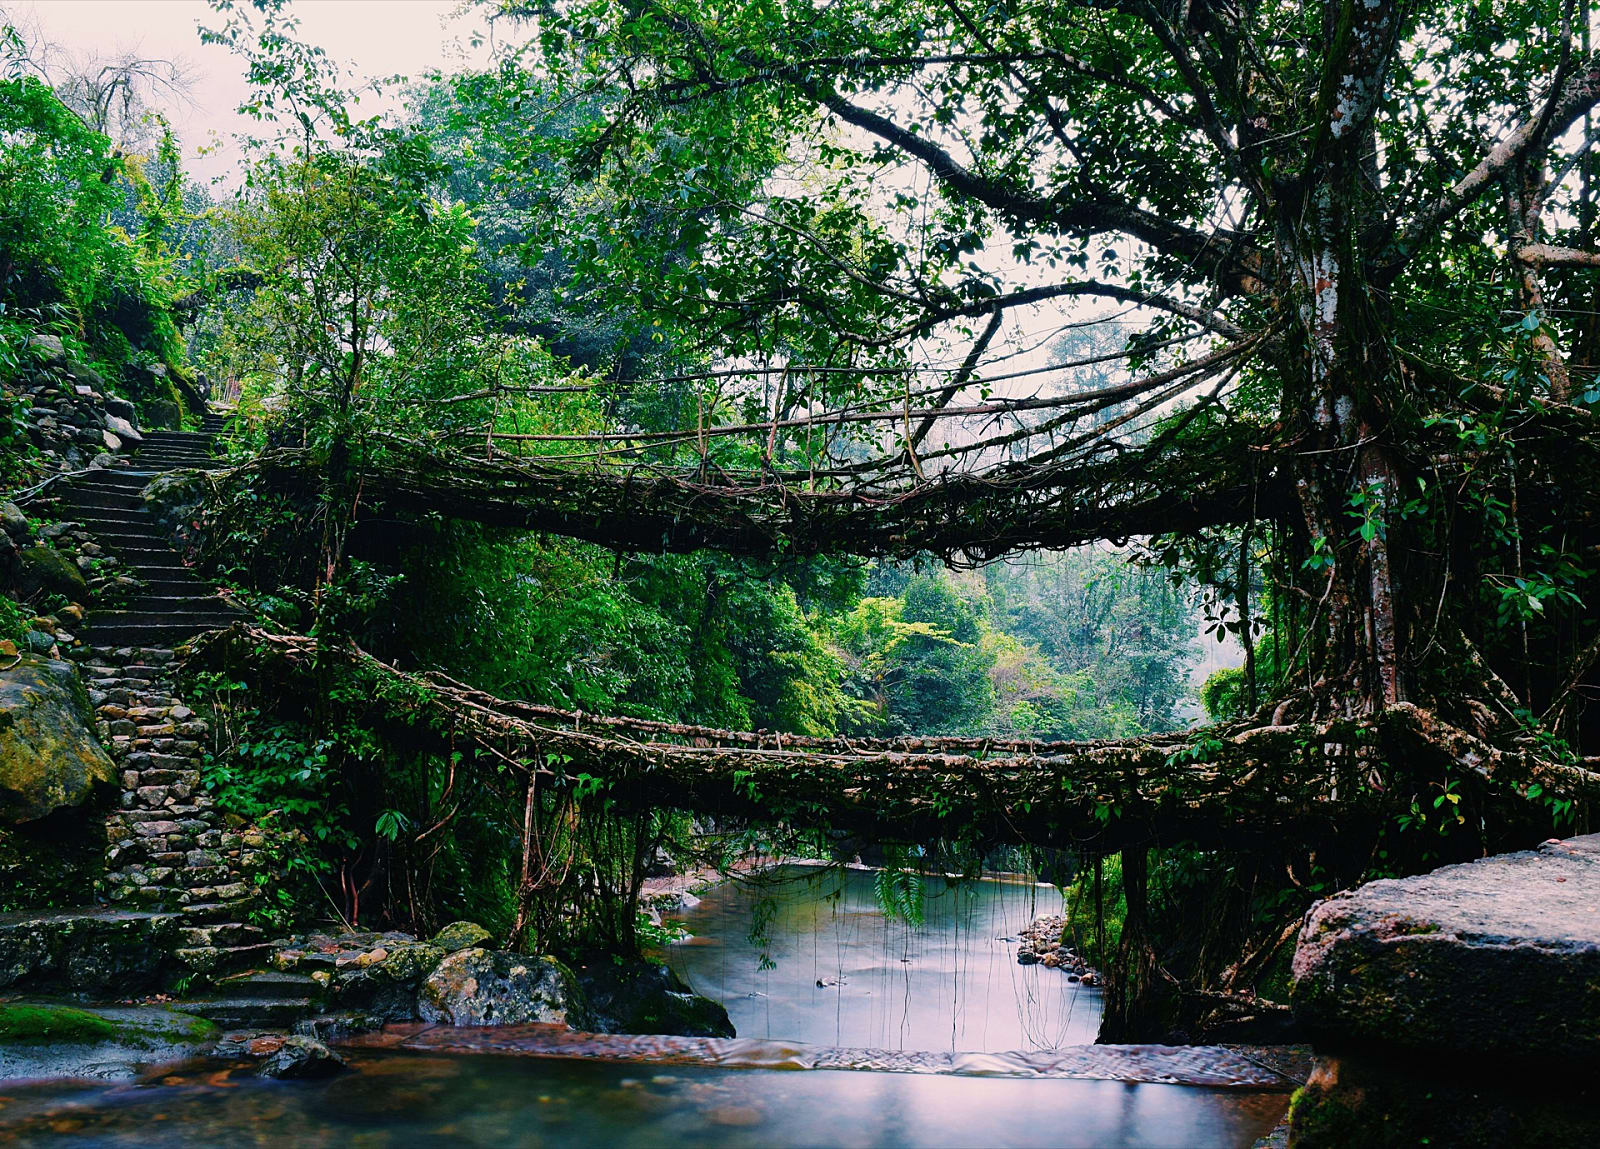 The Root Bridges of Cherrapunjee are Alive and Breathing